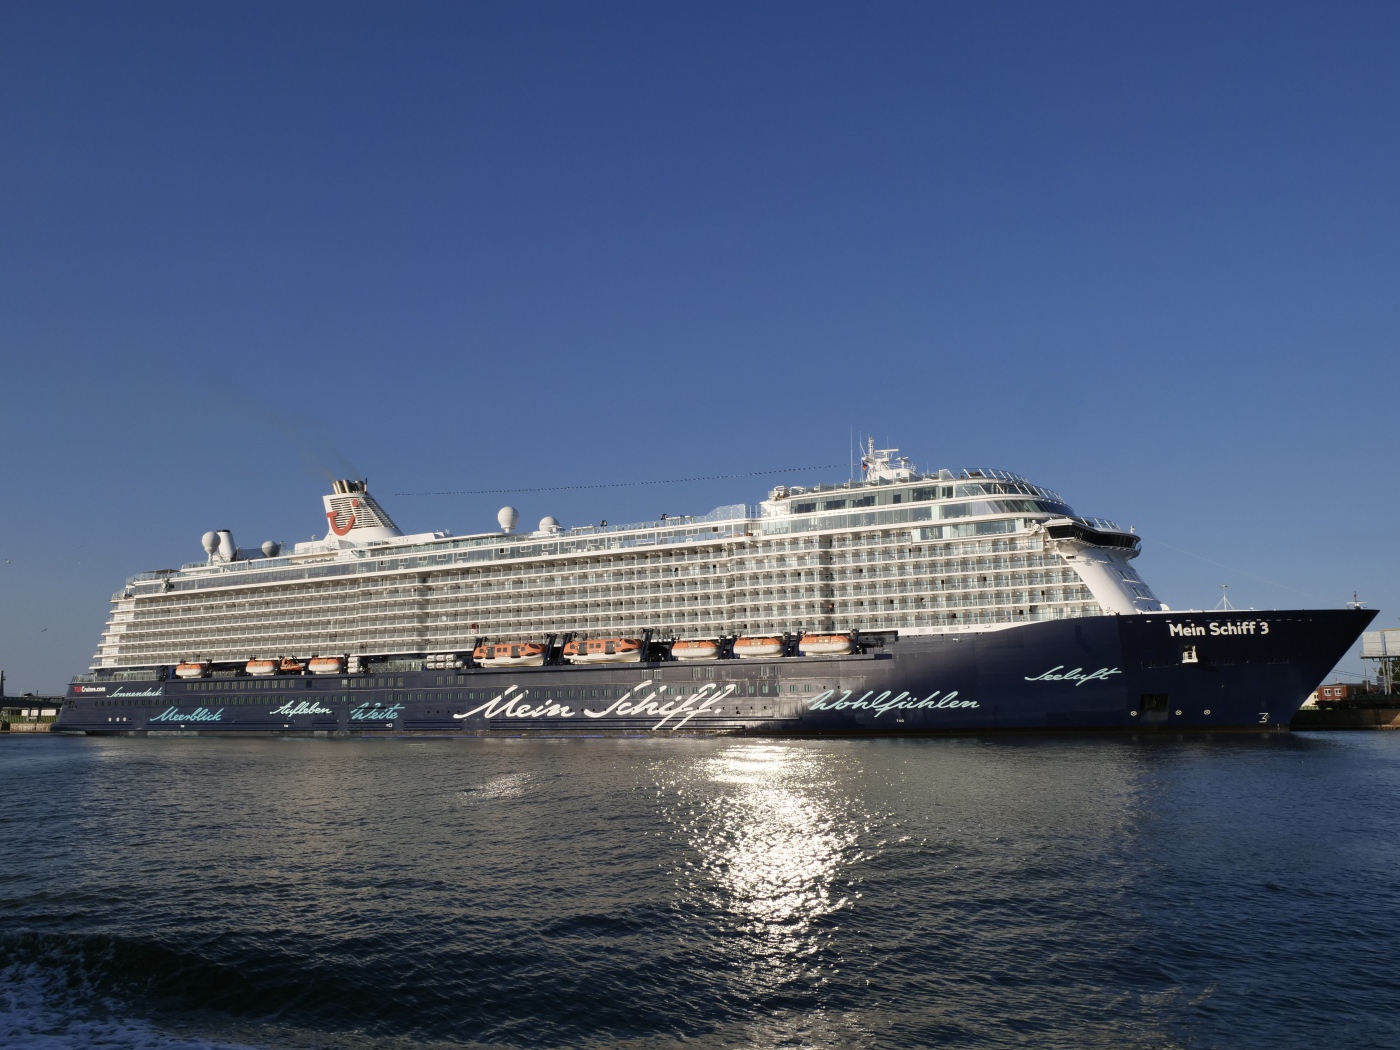 Large cruise ship Mein Schiff at sea